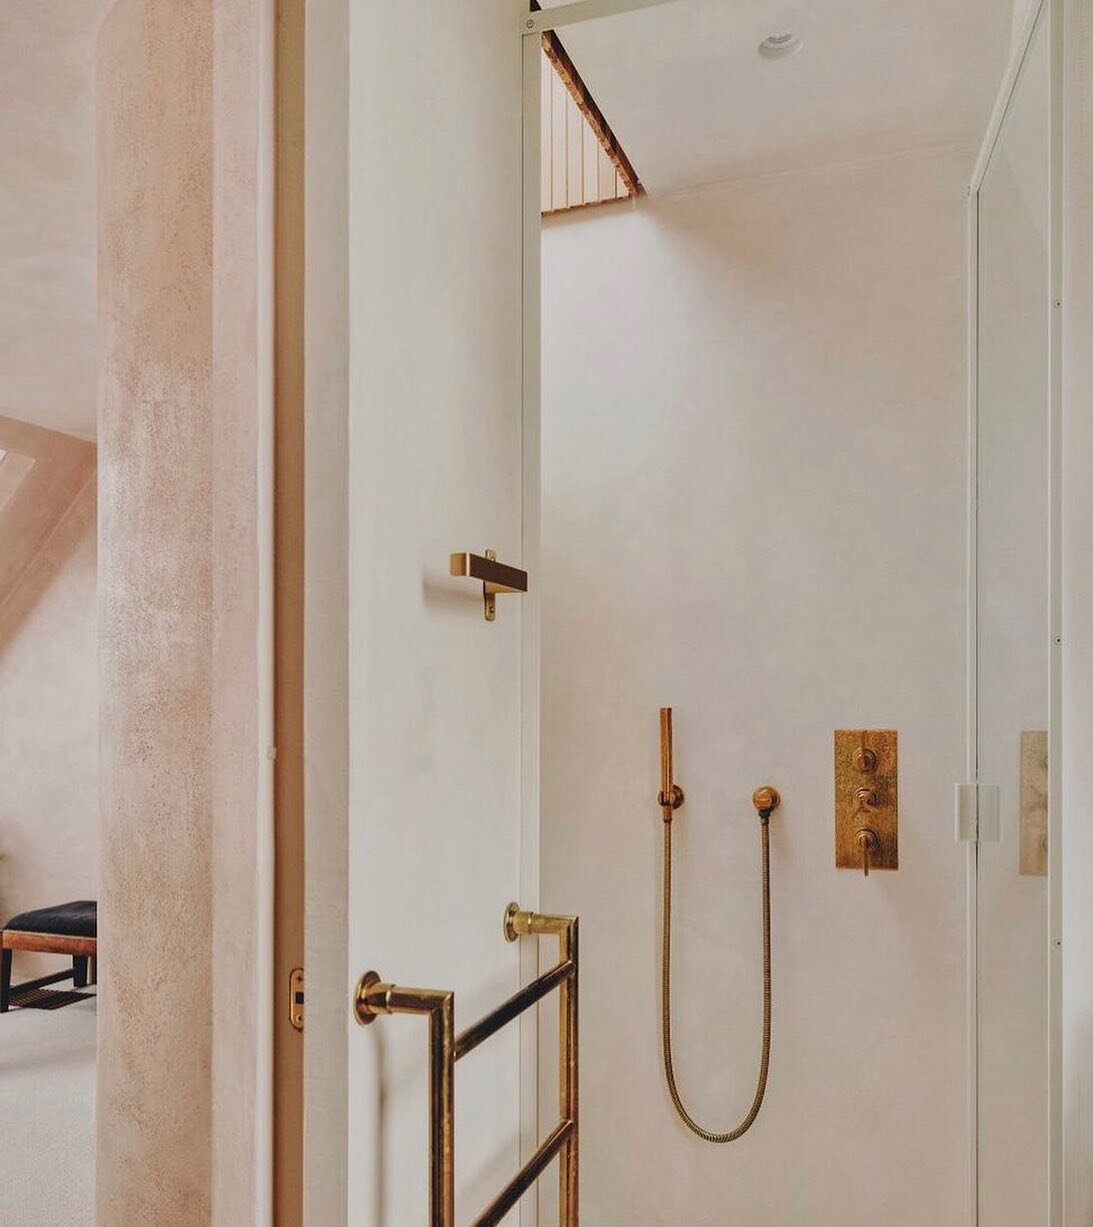 Unlacquered Brass showcasing its beautiful patination against these neutral tones. Project by @studiohagenhall photography by @mariell.lindhansen #brasstap #brasstaps #bathroomdesign #bathroominspo #bathroomdecor #bathroom #shower #showerdesign #stud